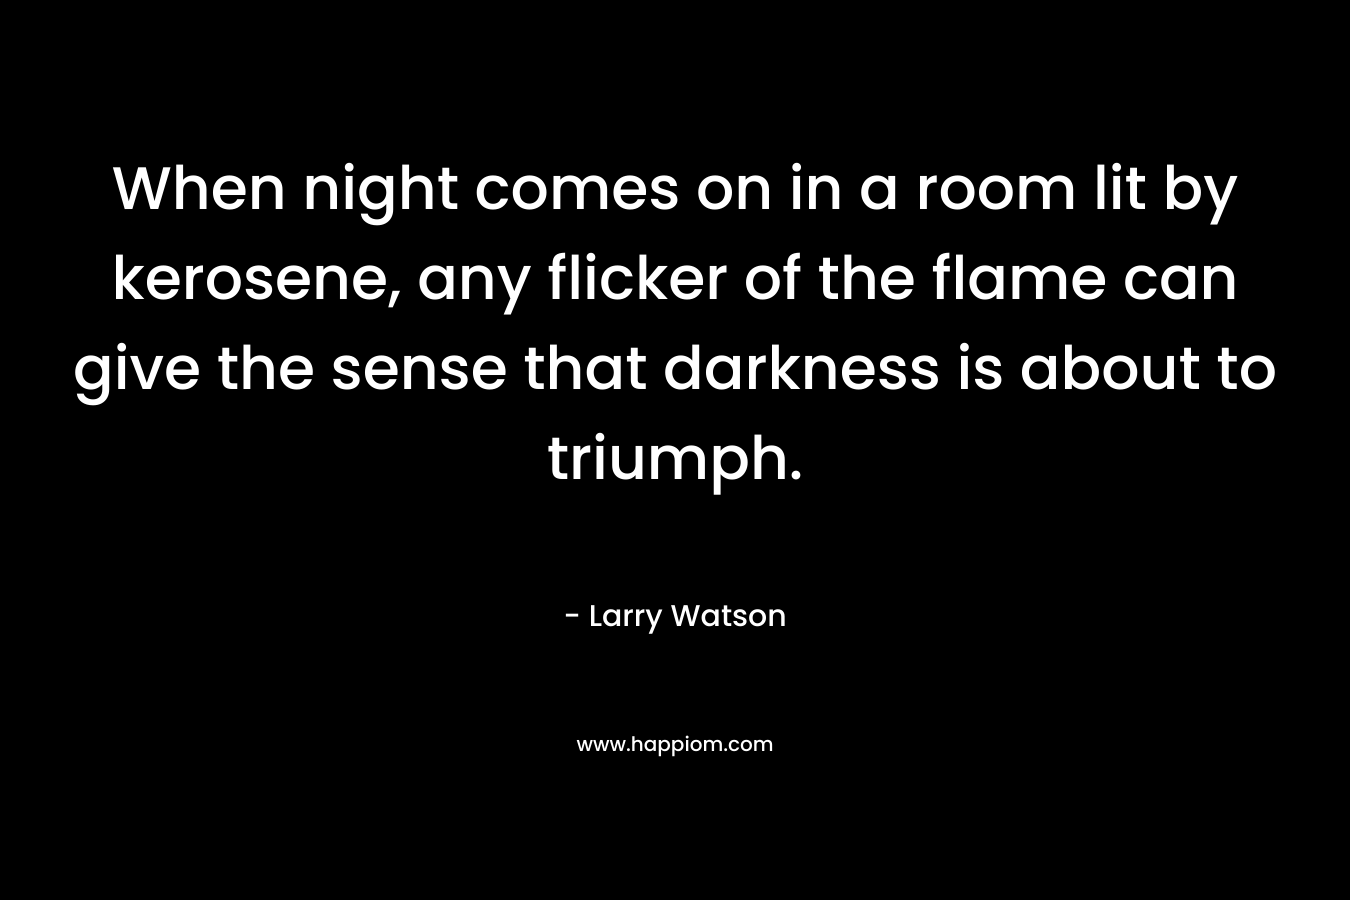 When night comes on in a room lit by kerosene, any flicker of the flame can give the sense that darkness is about to triumph.